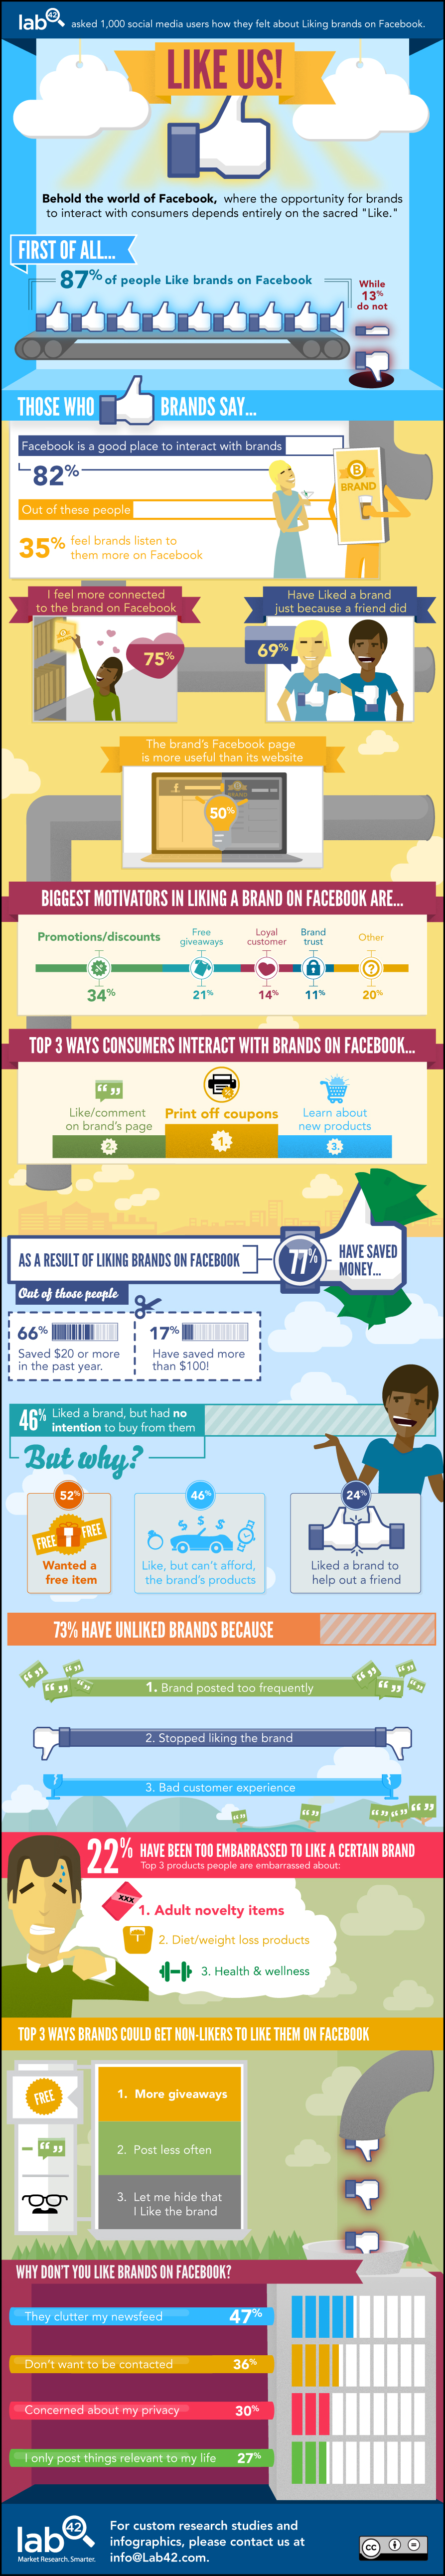 facebook like brand infographic lab42